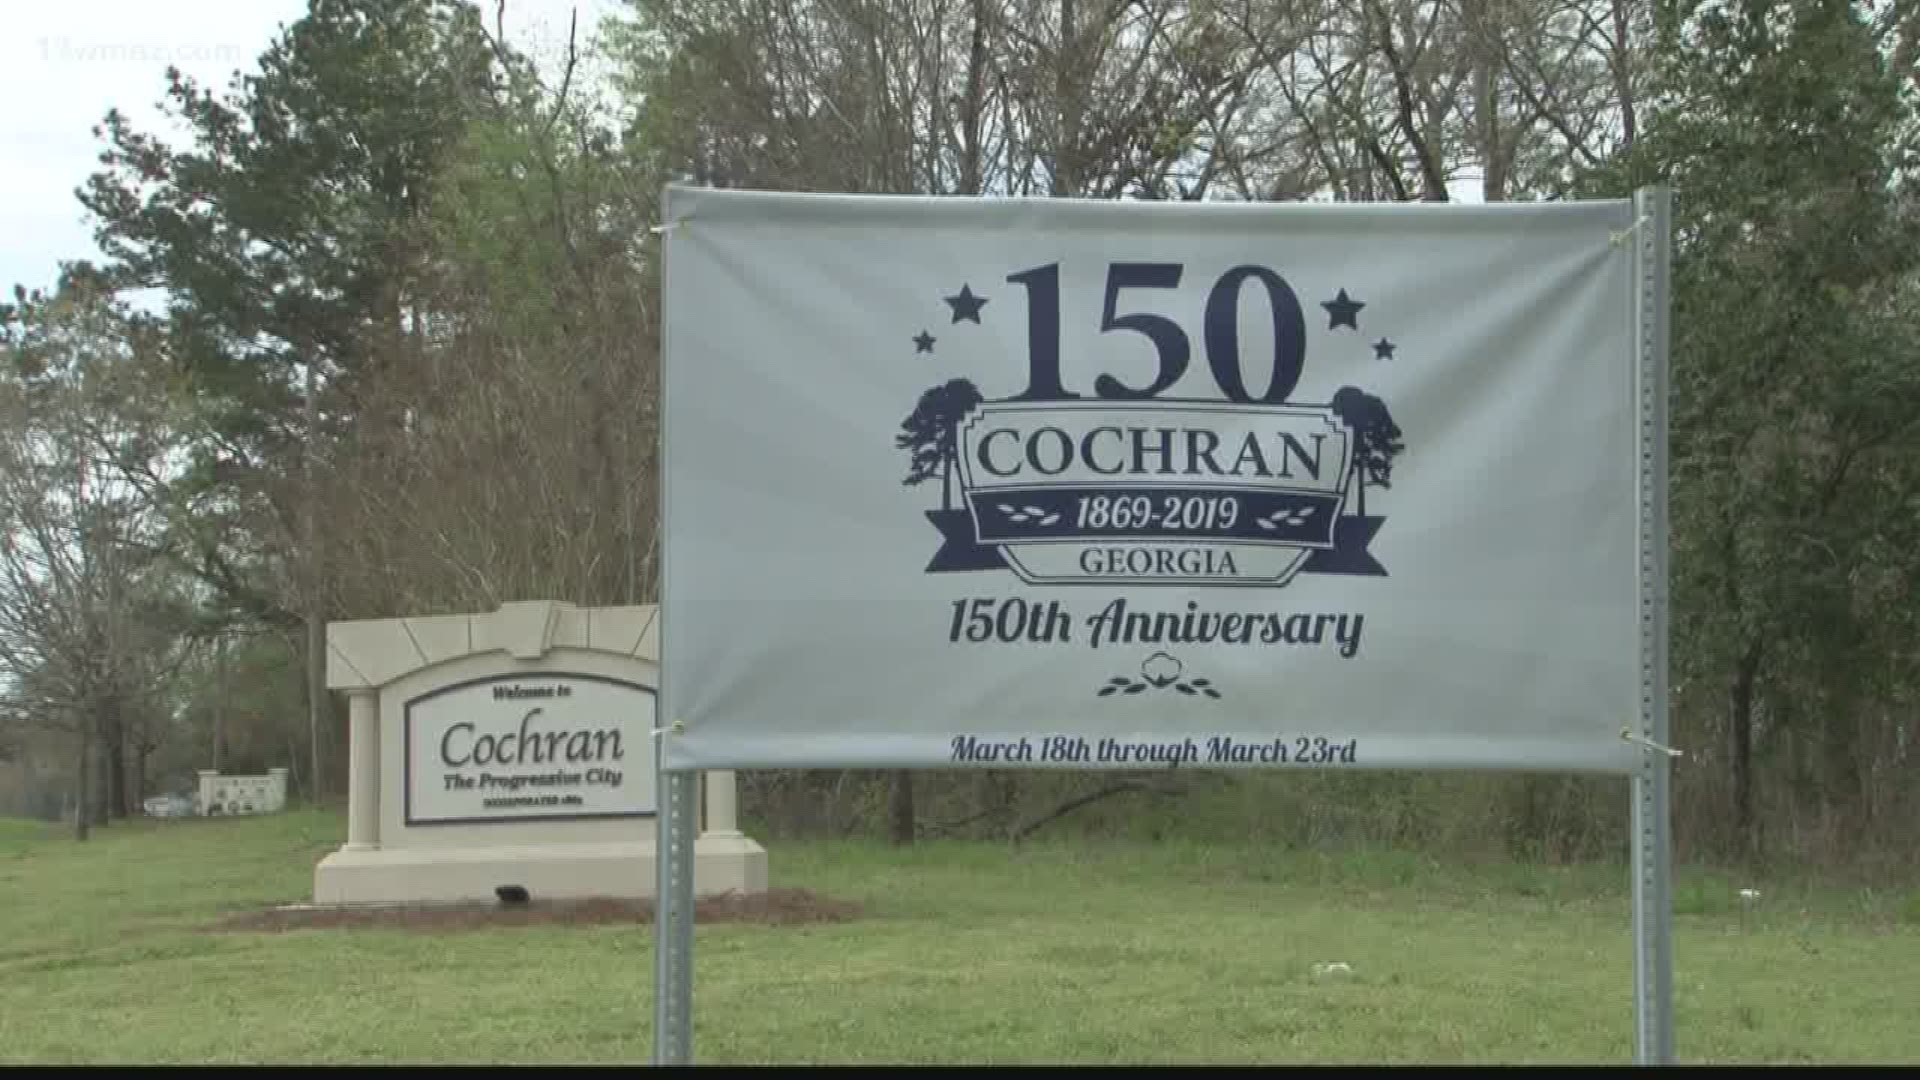 This week, Cochran has a slew of events planned as they celebrate their 150th birthday. Here's a little history of the town of about 5,000 people.